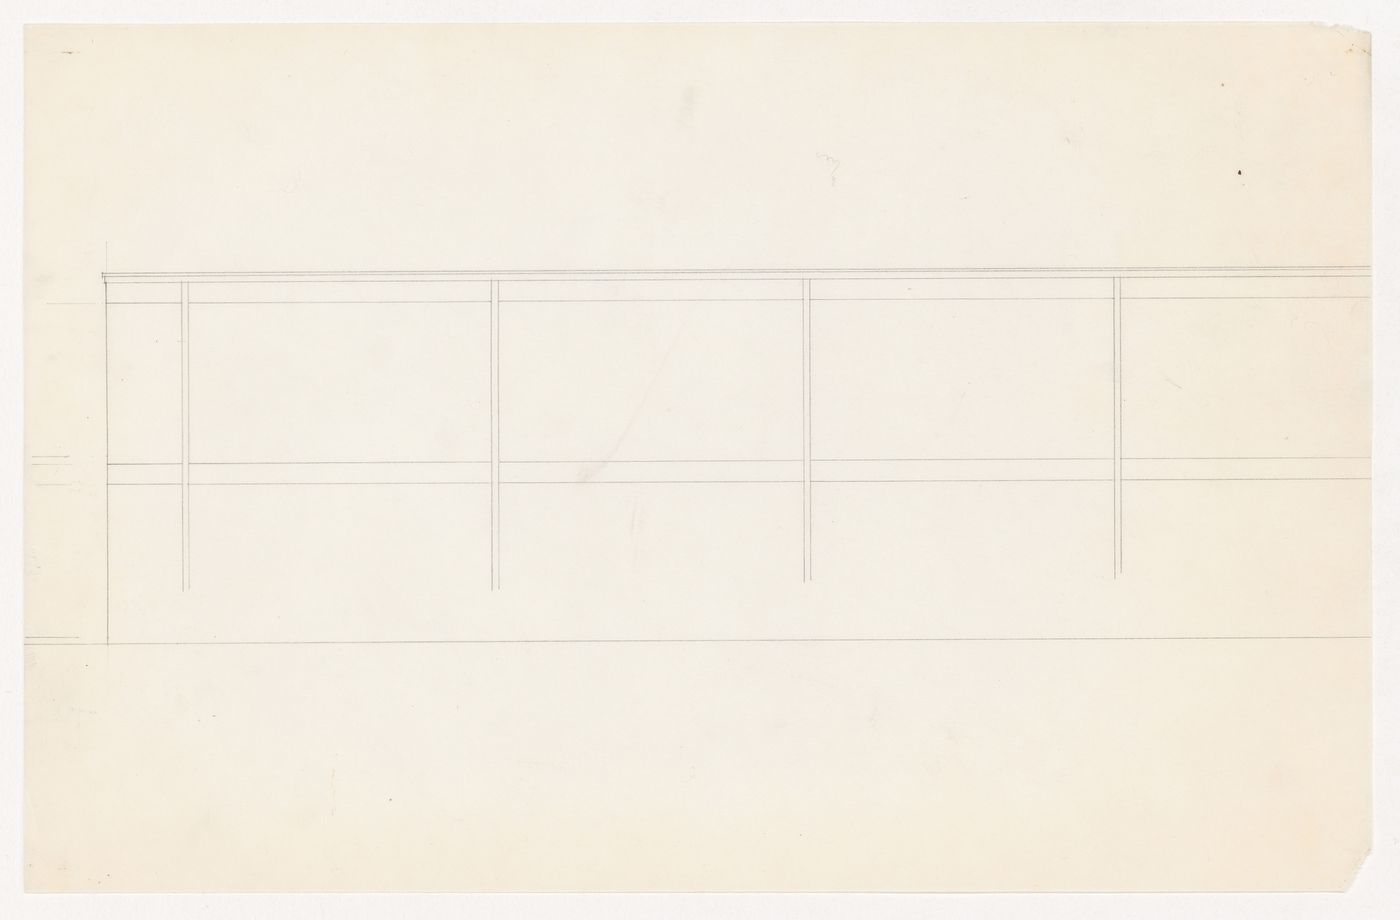 Partial elevation for a cornice and windows for the Metallurgy Building, Illinois Institute of Technology, Chicago